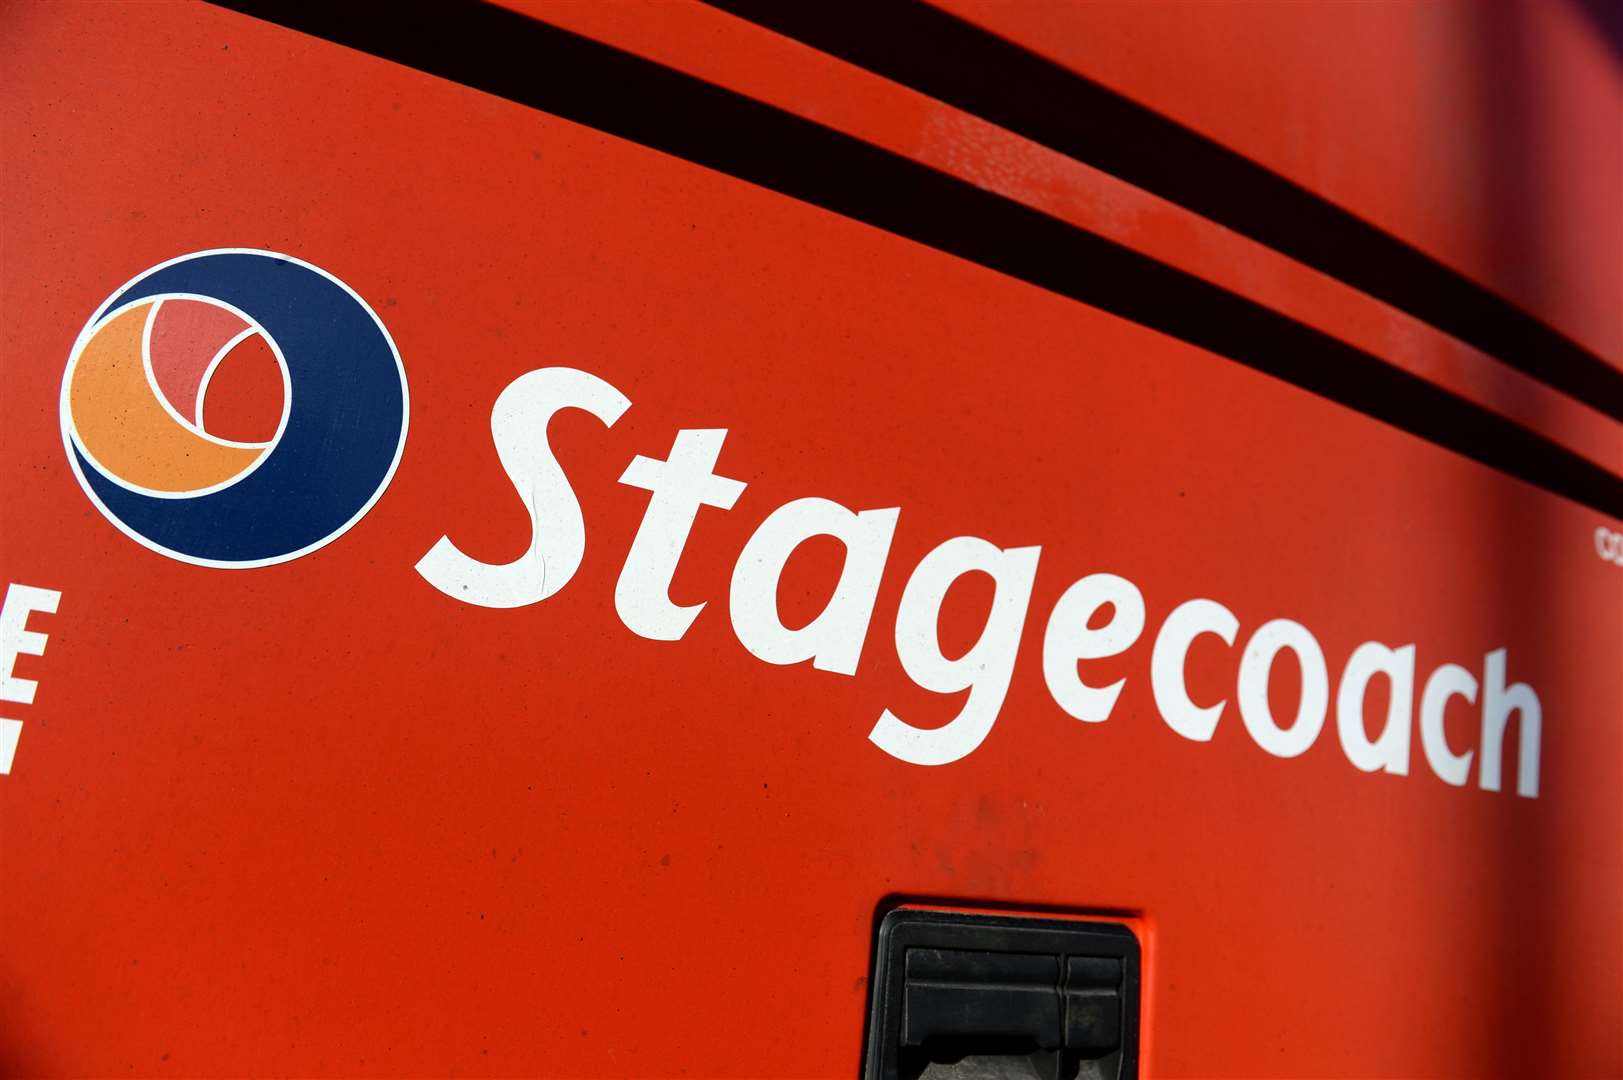 January offer from Stagecoach.